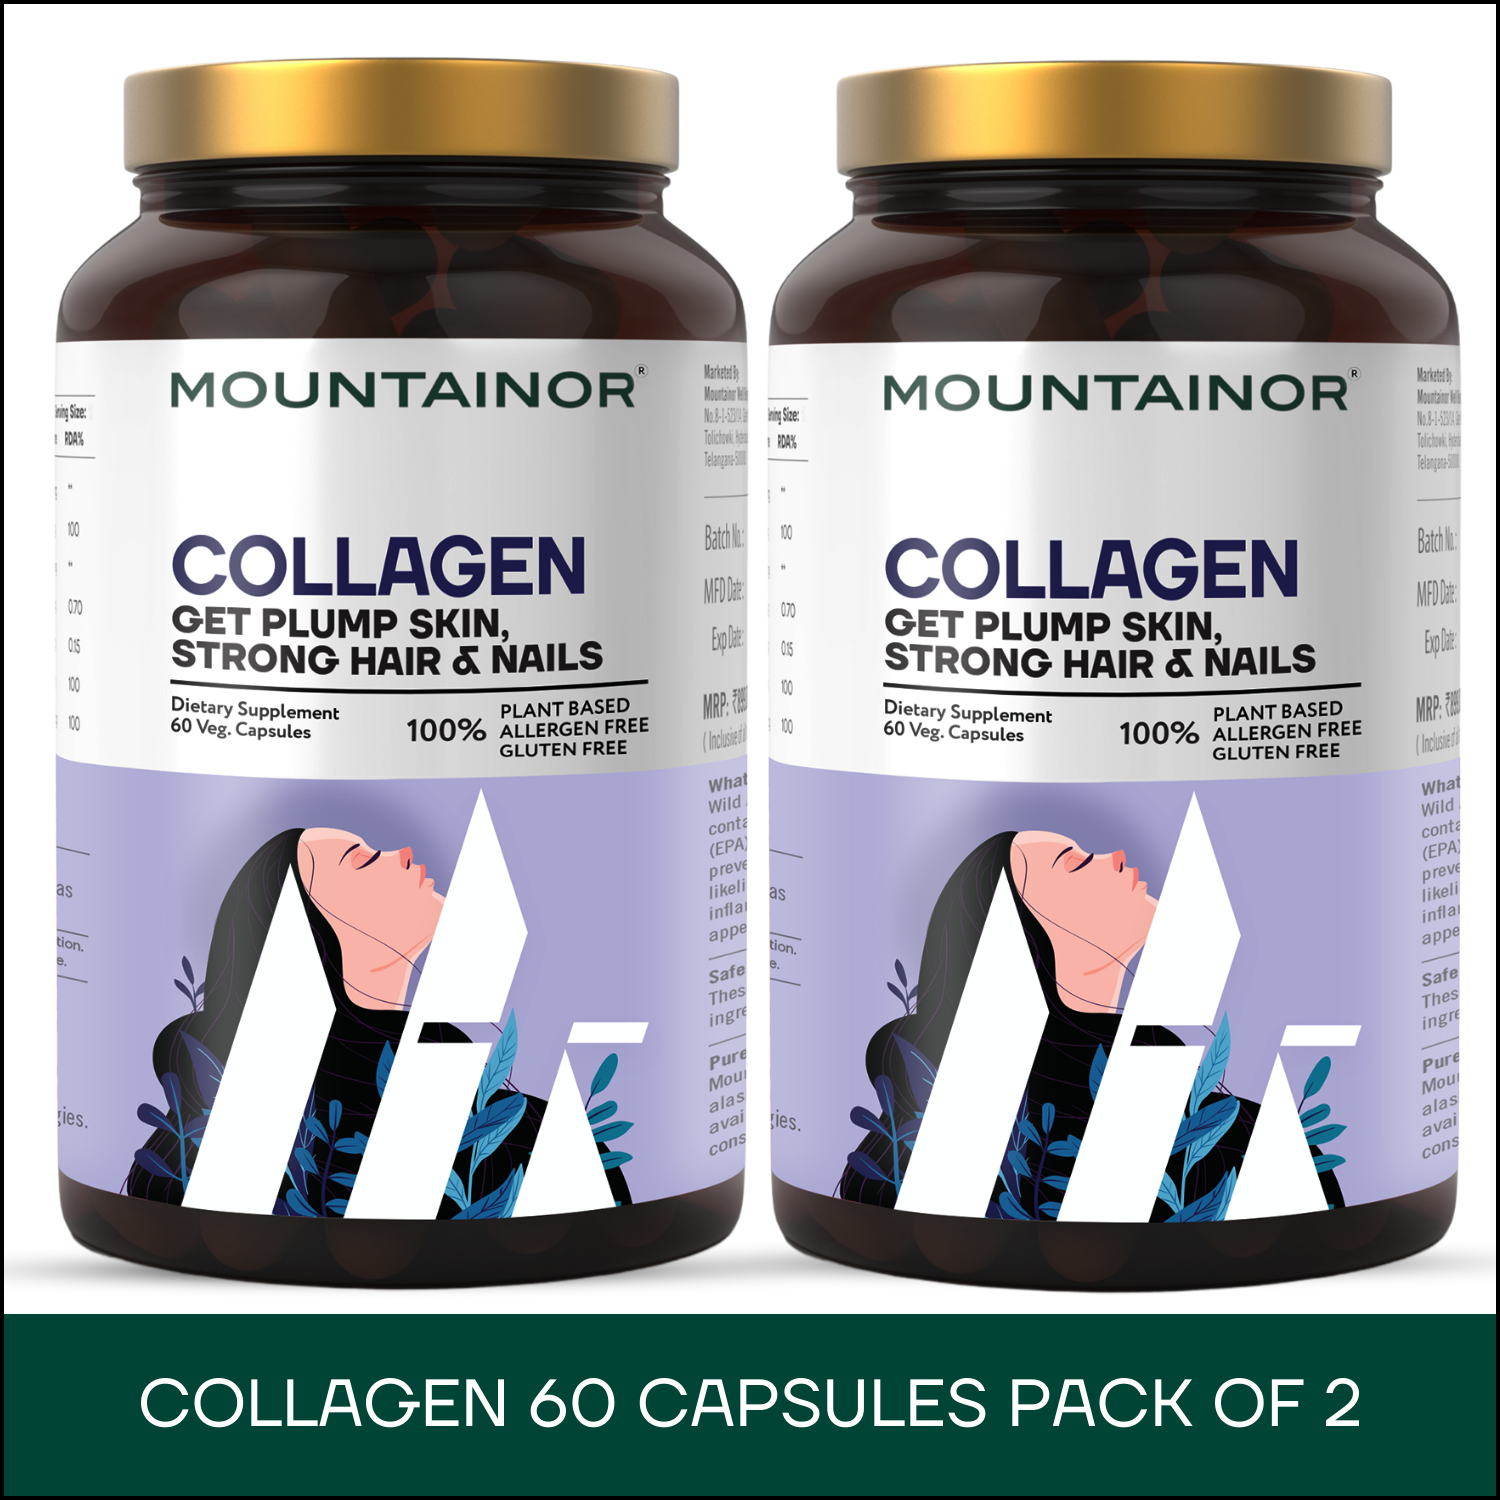 Collagen Capsules for Healthier Skin, Hair & Joints - Pack of 2